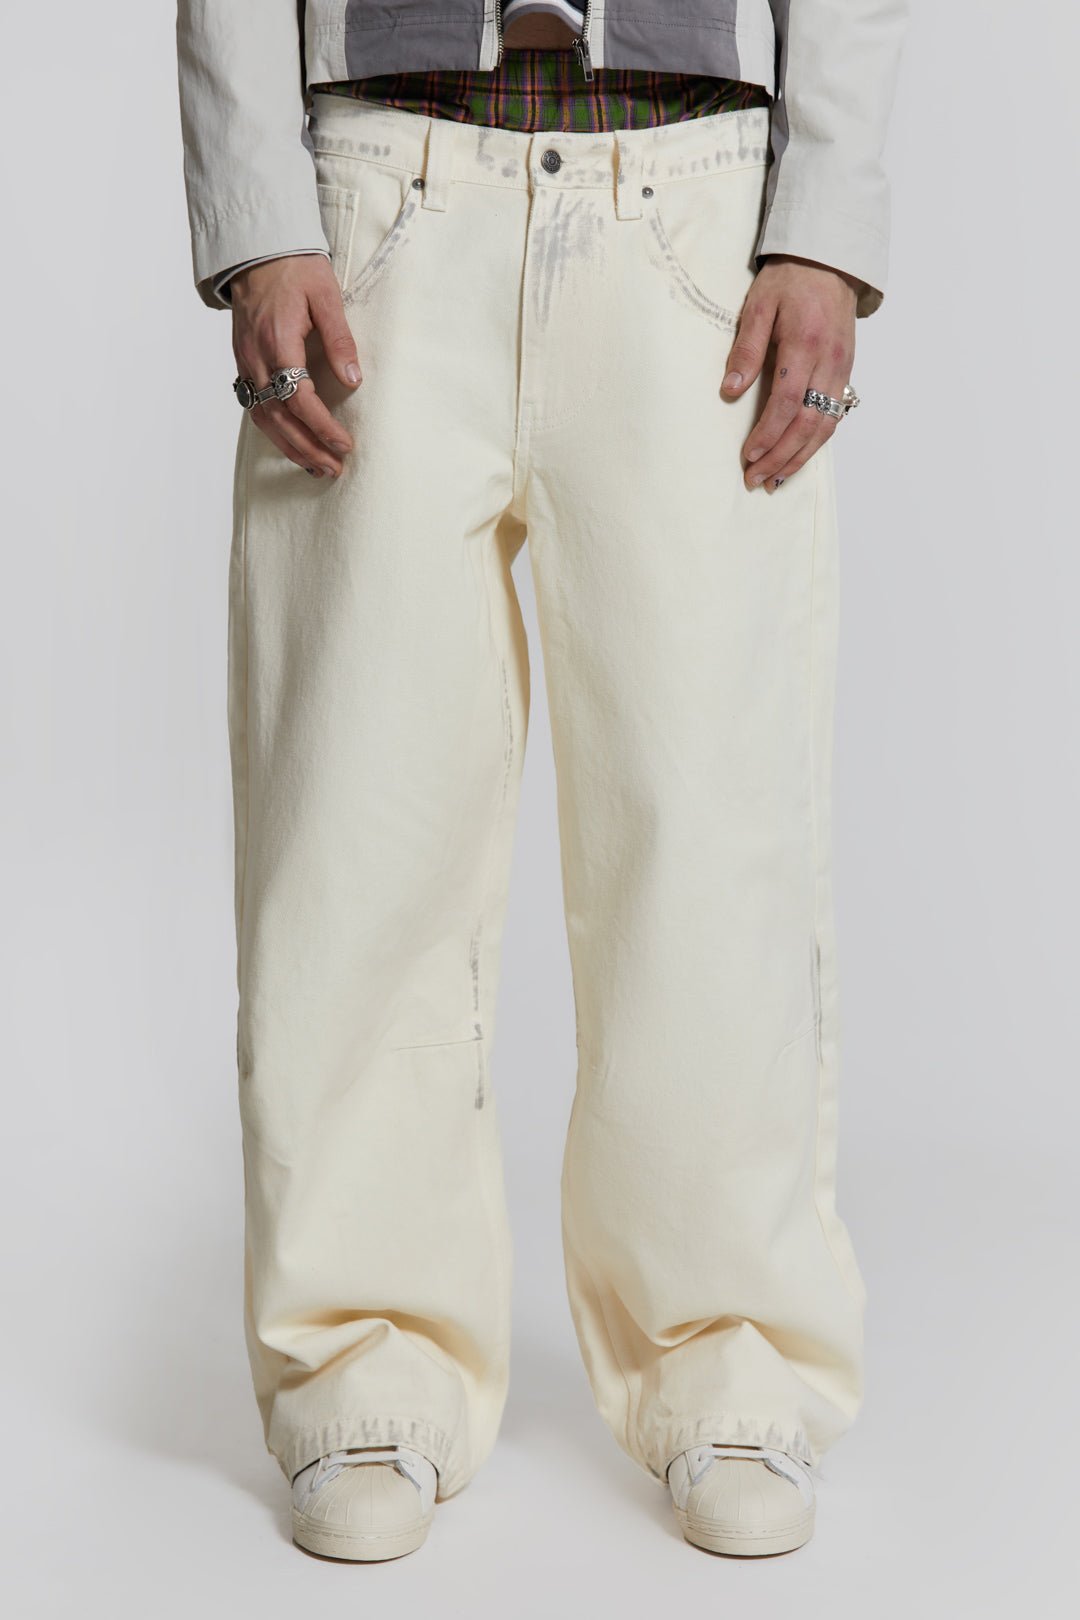 Dirty White Colossus Baggy Jeans